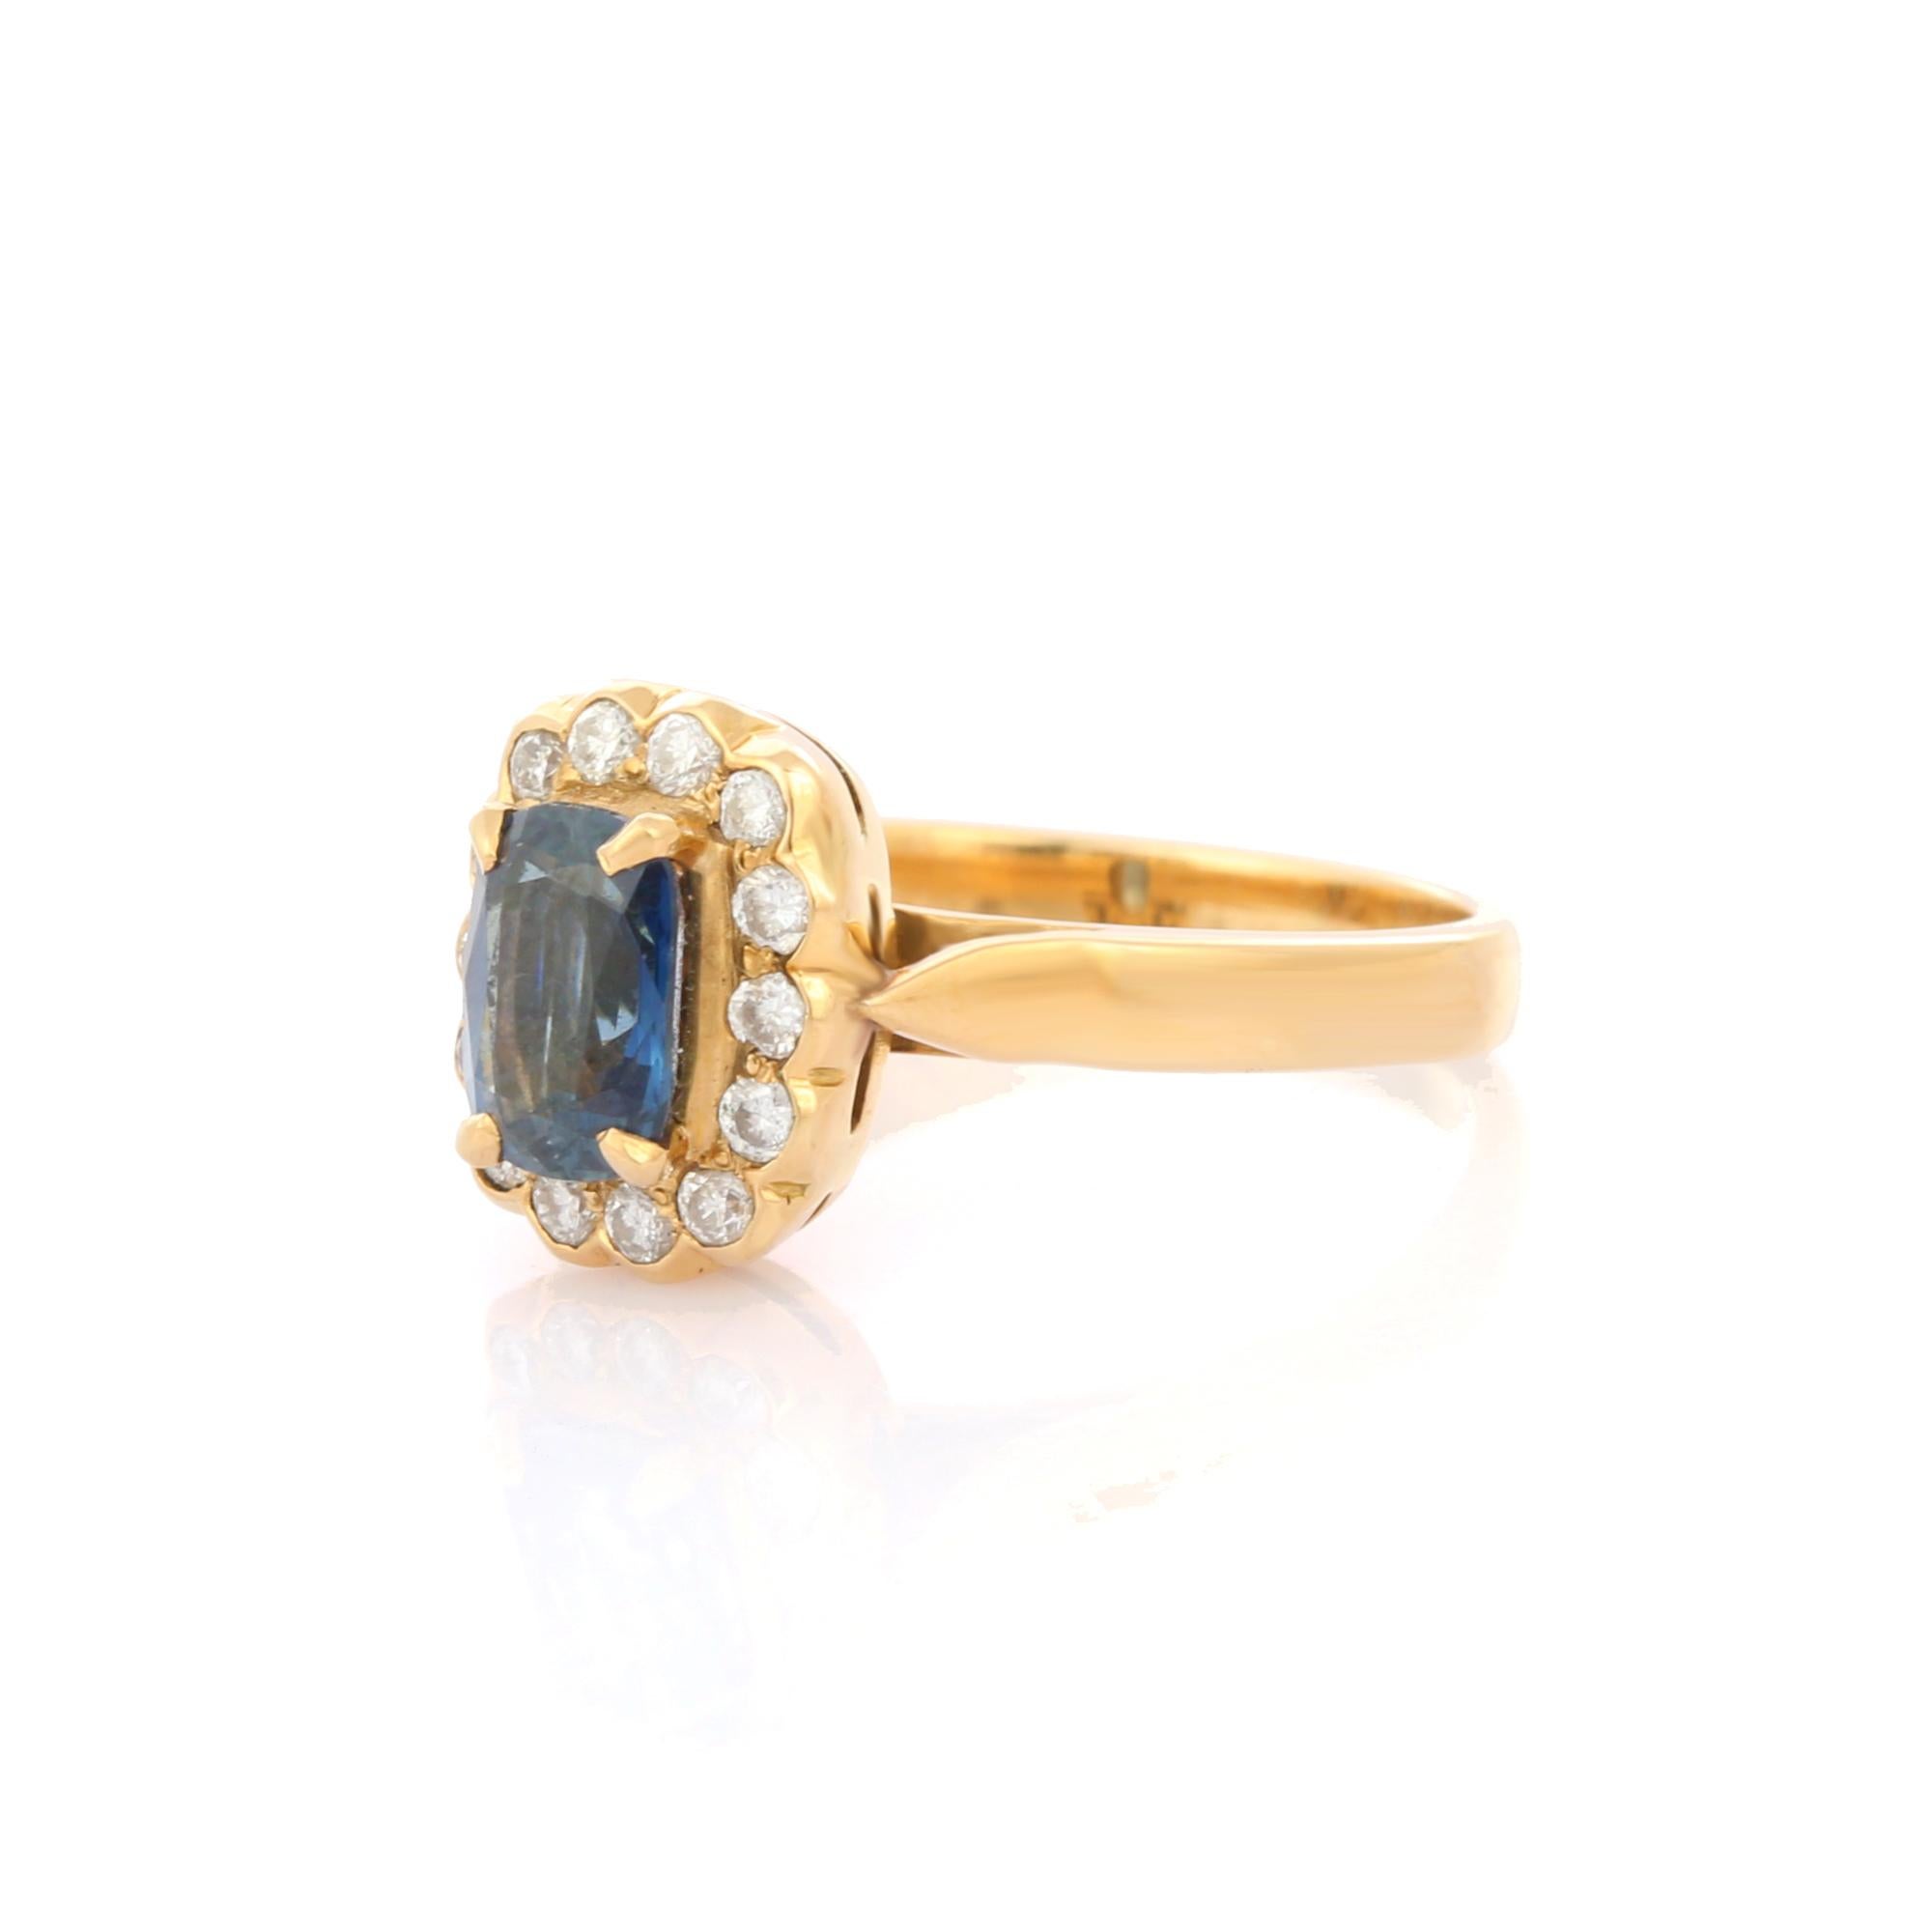 For Sale:  18K Yellow Gold Blue Sapphire Diamond Halo Ring Engagement Ring, Gift for Her 3